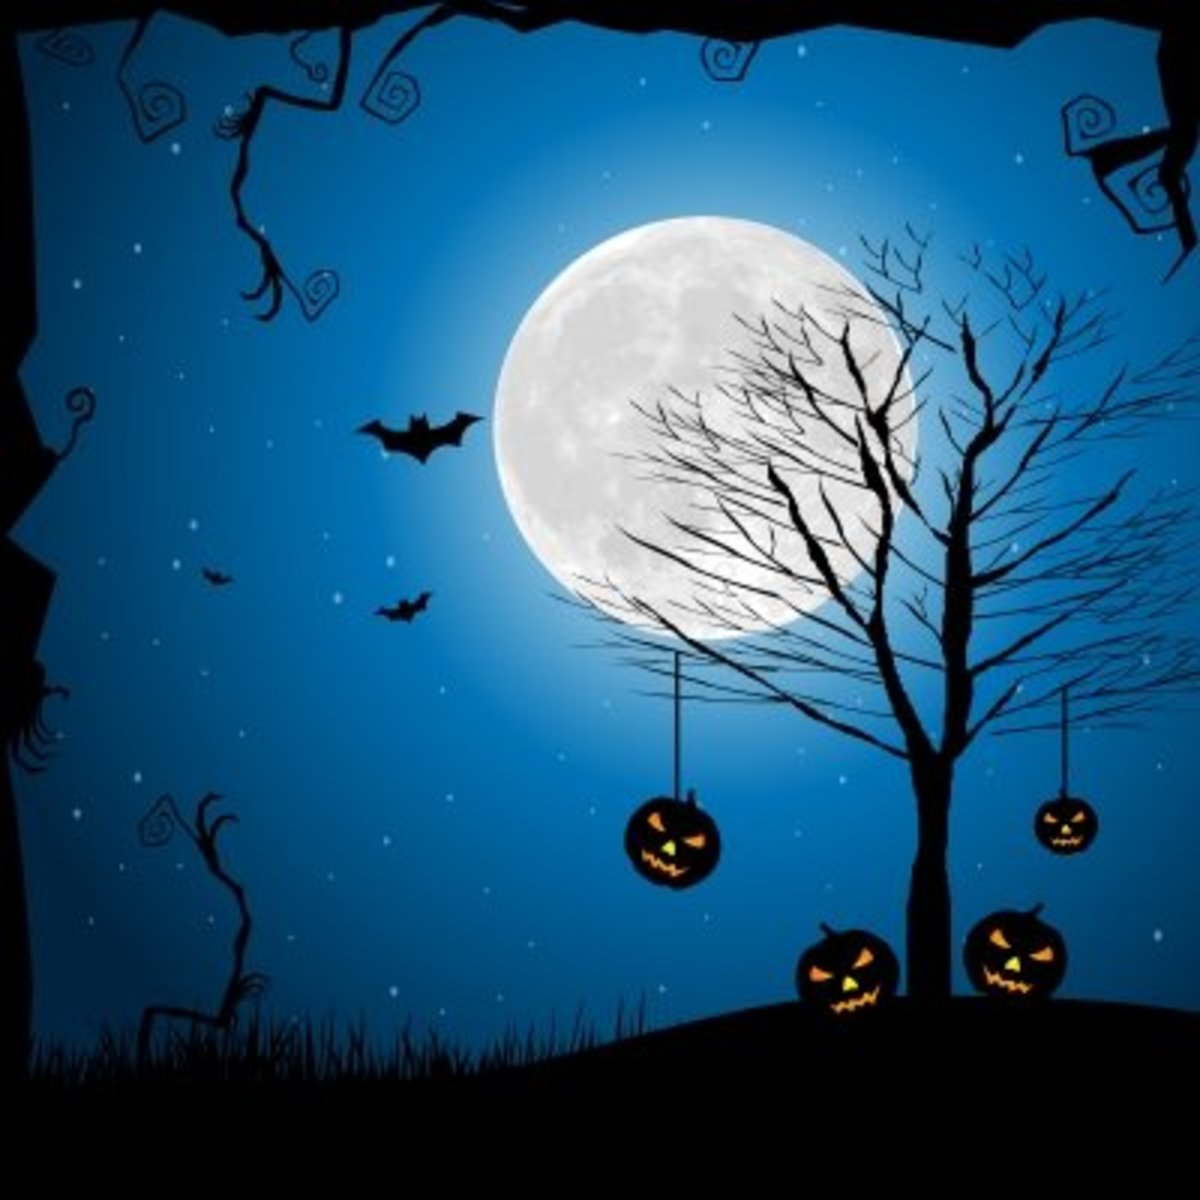 All Hallows Eve: The History of Halloween